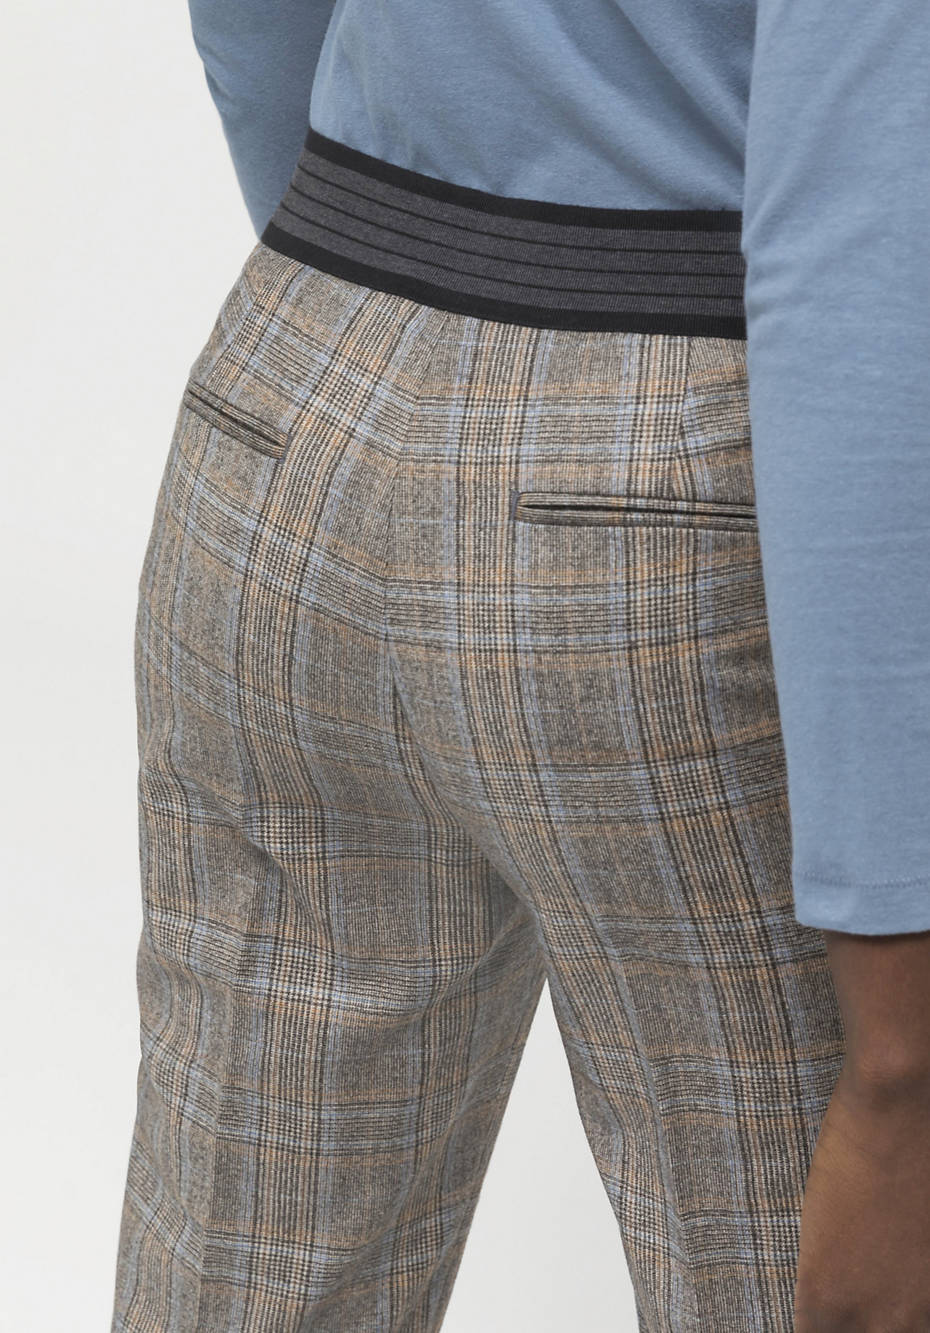 Checked trousers made of pure new wool